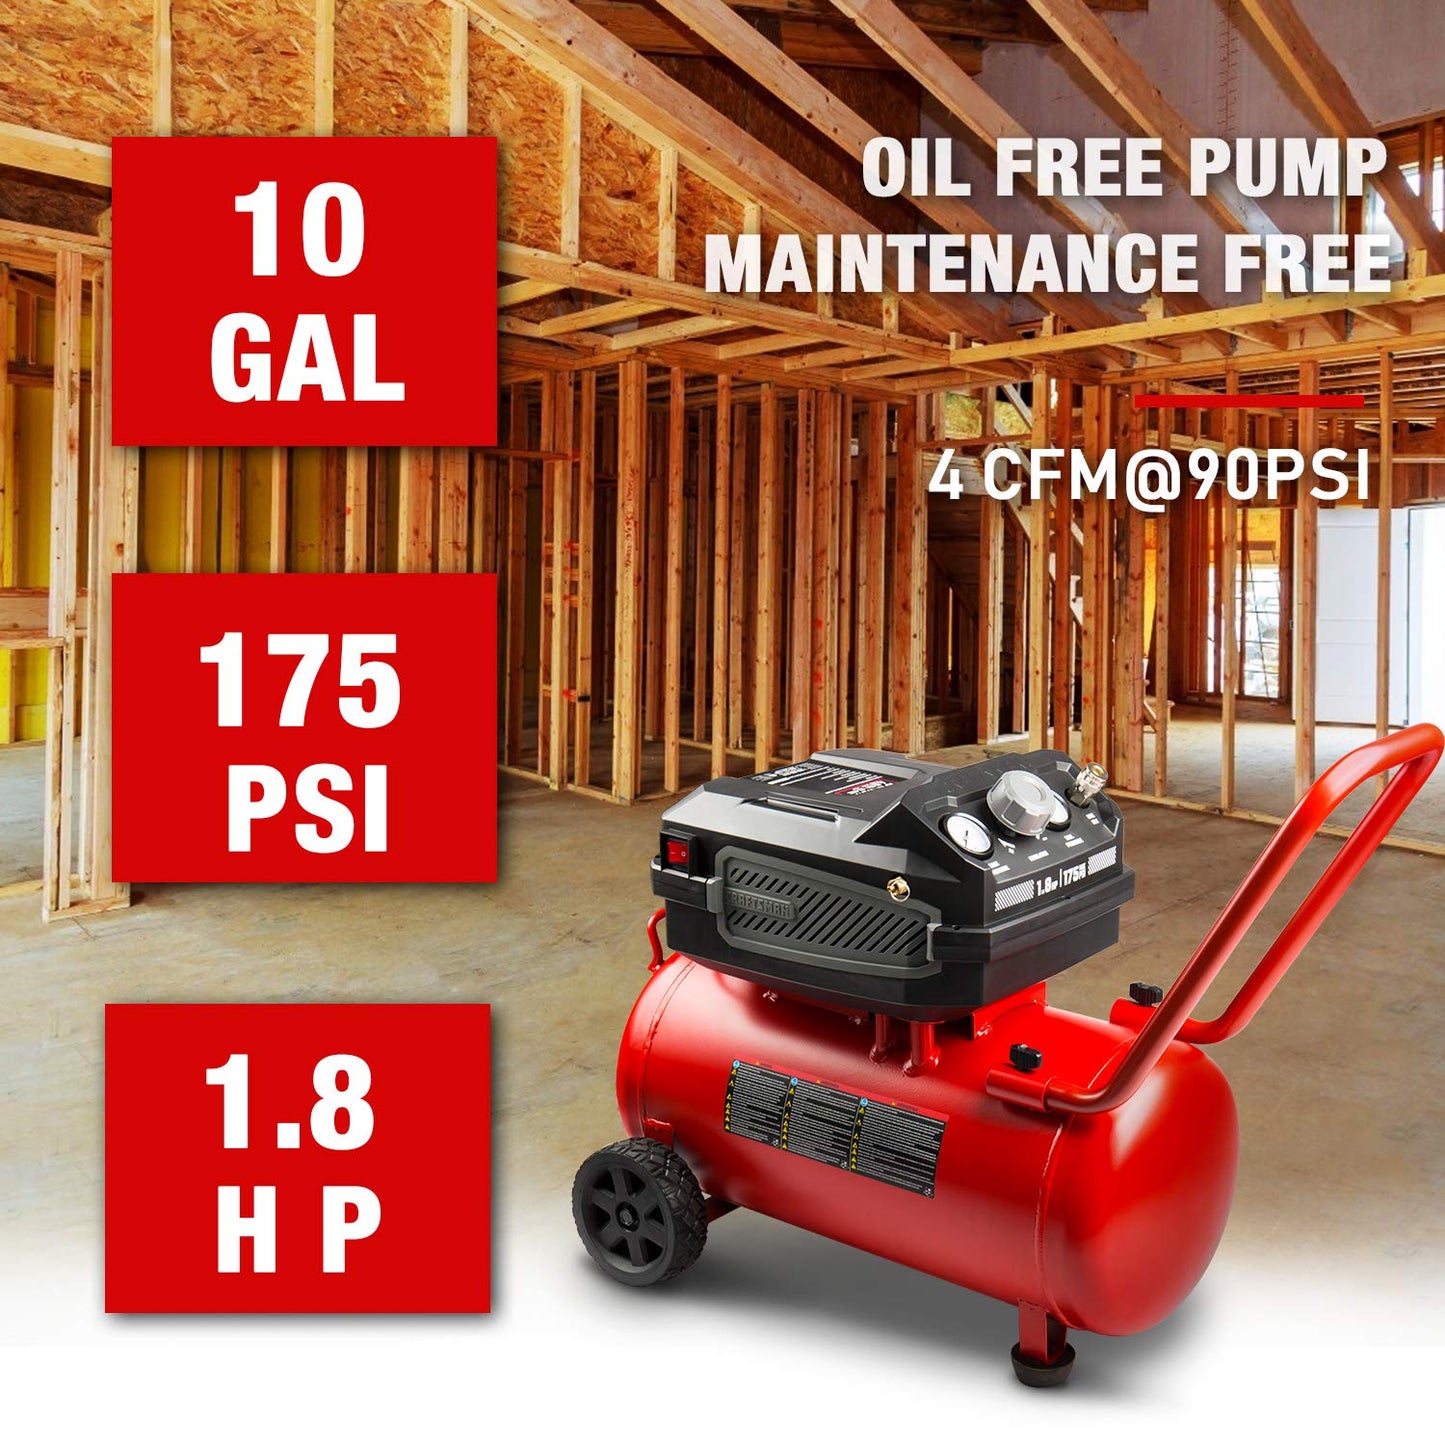 Craftsman Air Compressor, 10 Gallon 1.8 HP Max 175 PSI Pressure, Powerful and Portable Oil Free Compressor, Maintenance Free, for Home, Garage,